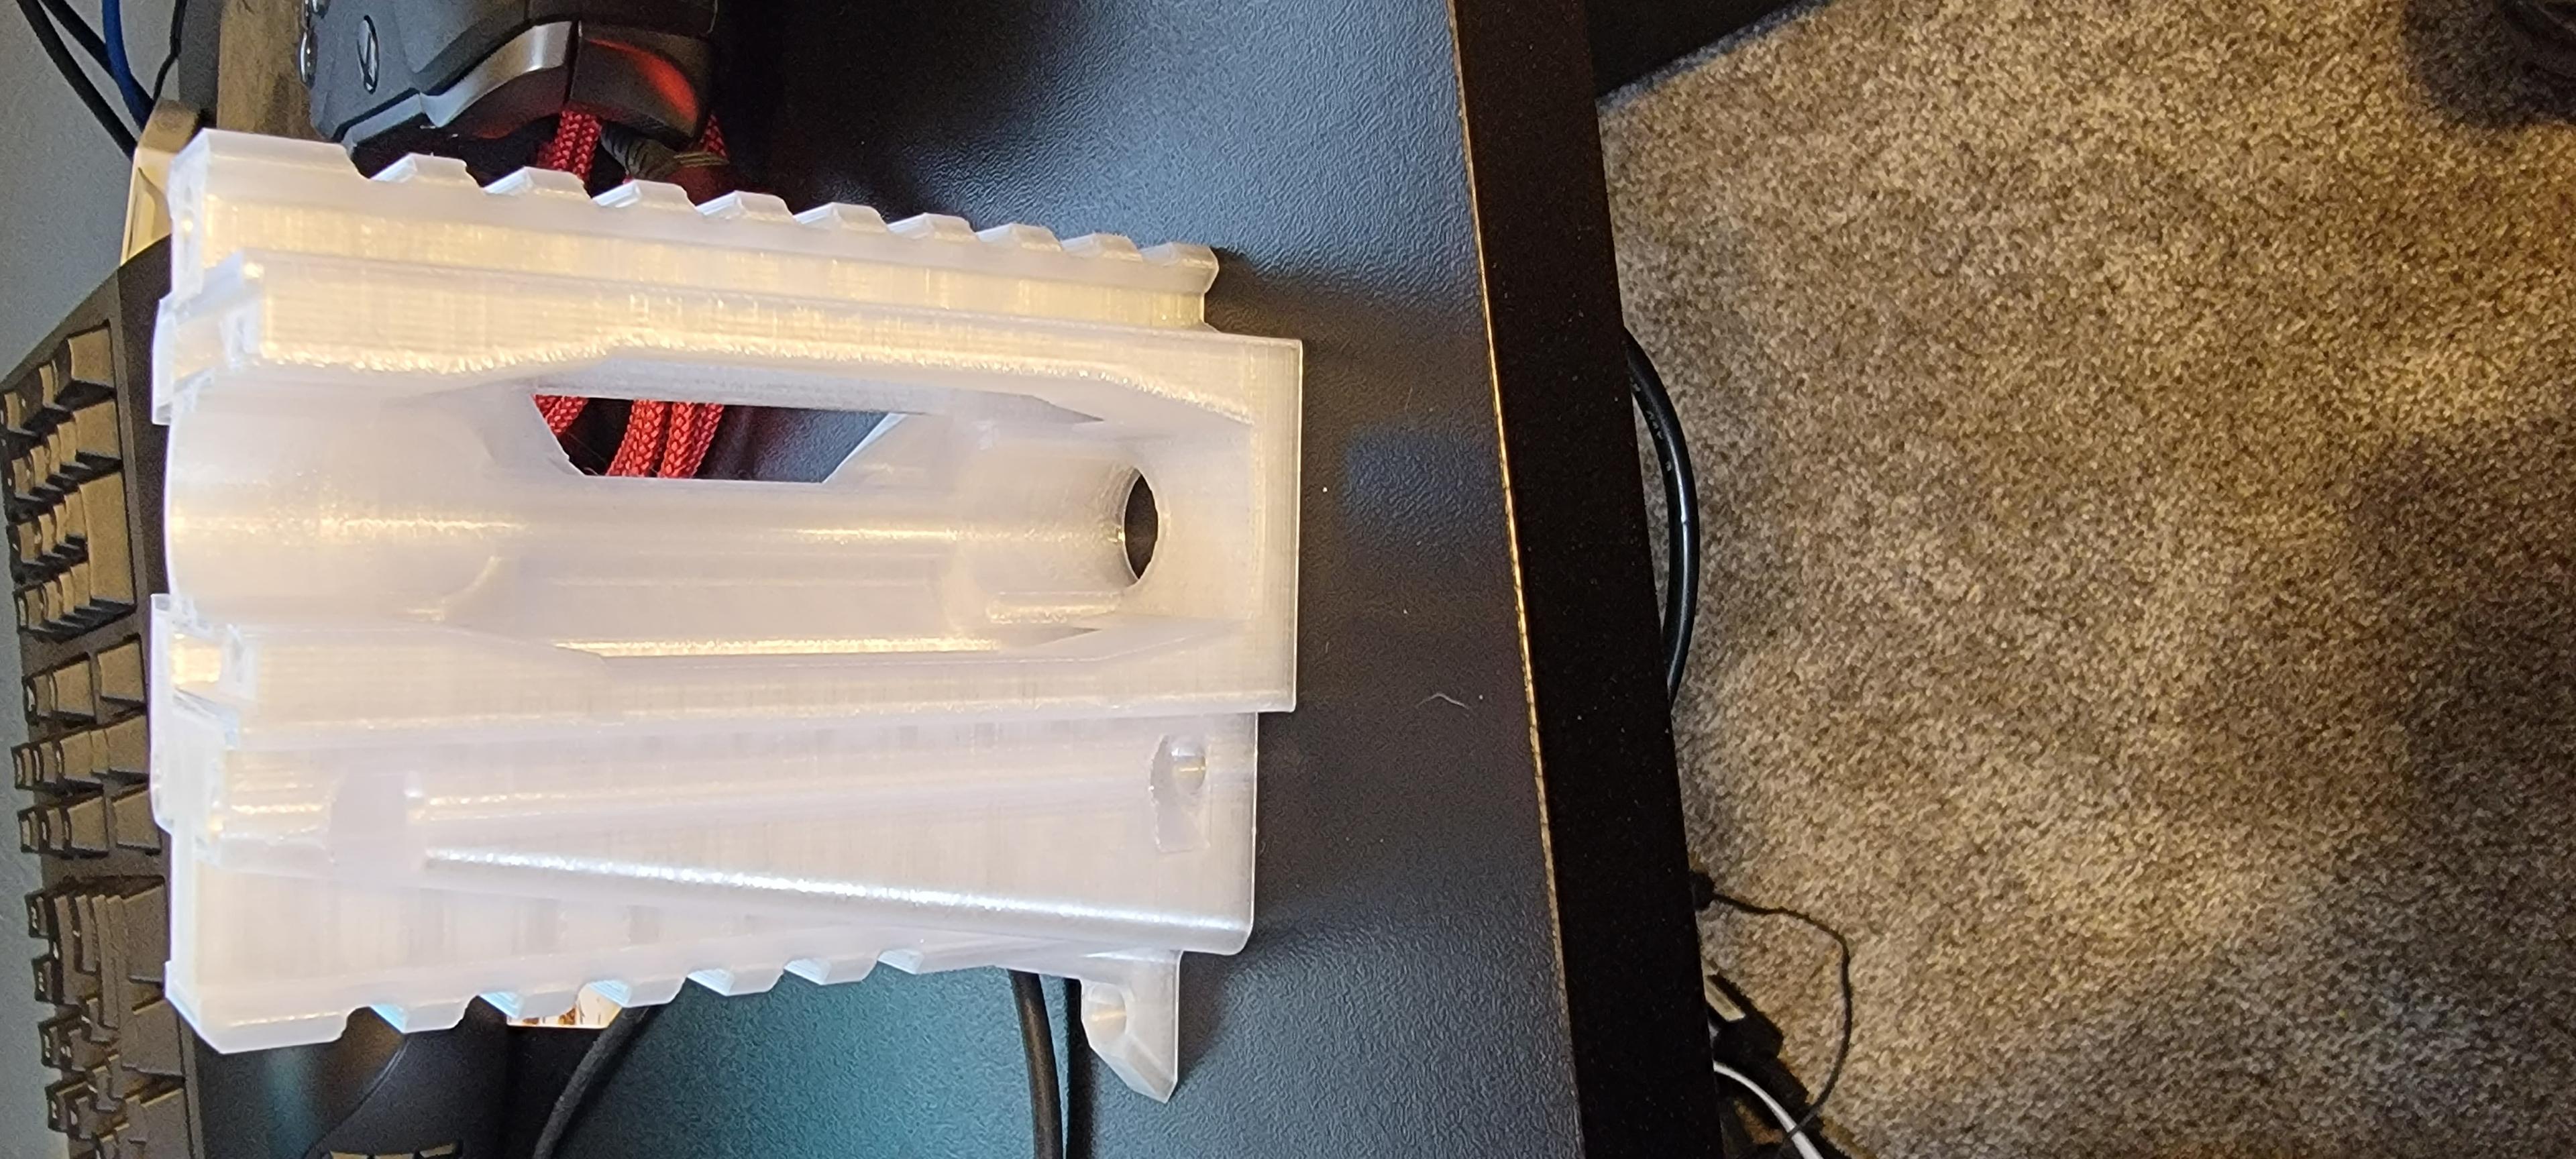 Caliburn Raider Receiver and Magwell - Prints great no supports  petg - 3d model